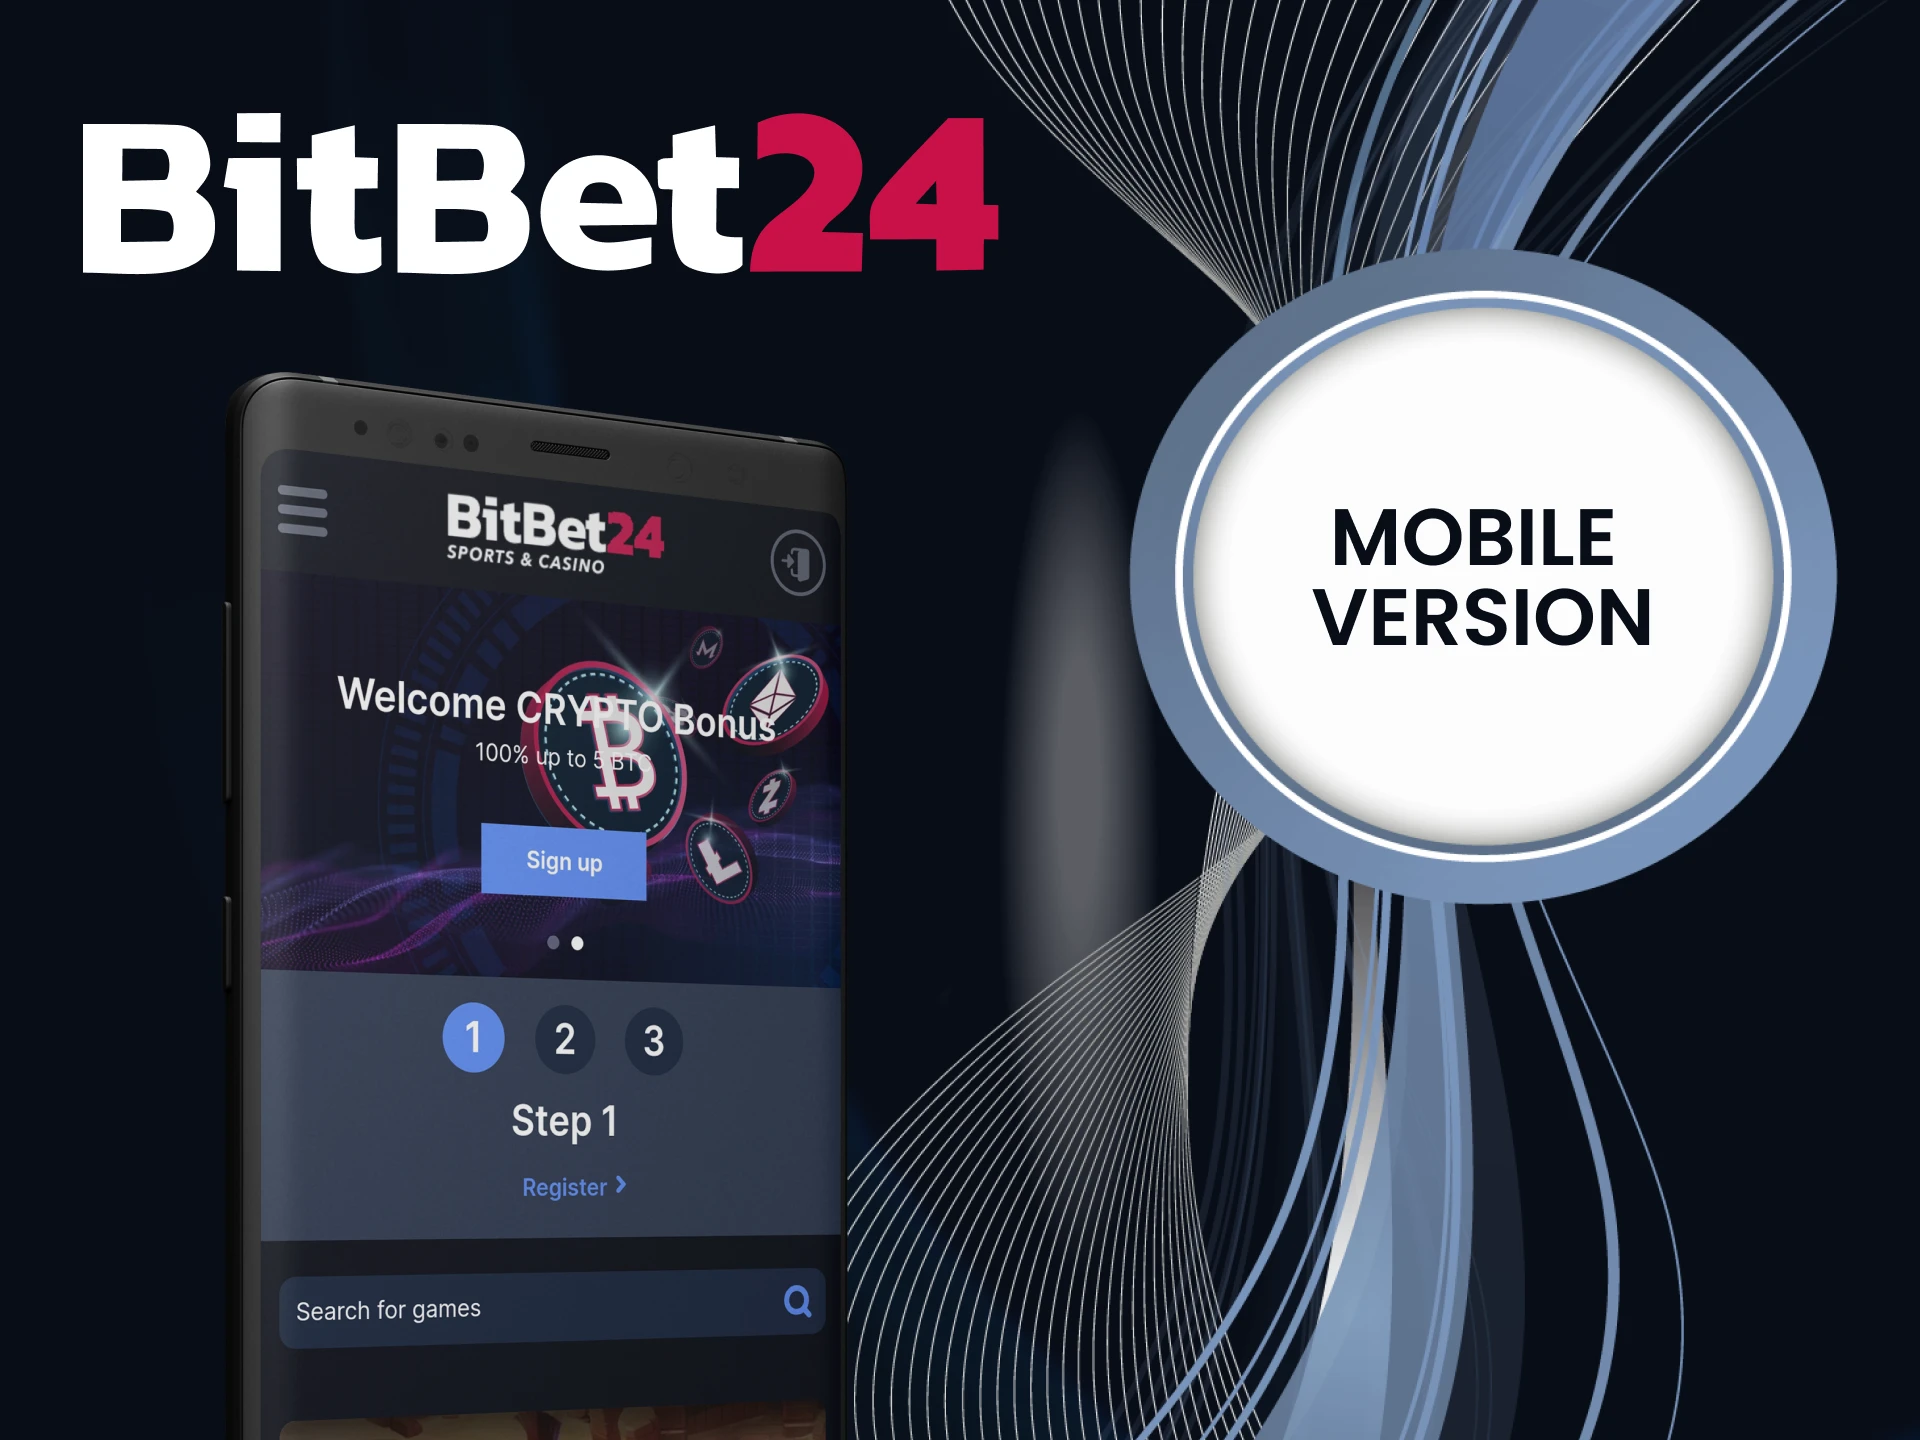 With BitBet24, play anywhere on your phone.